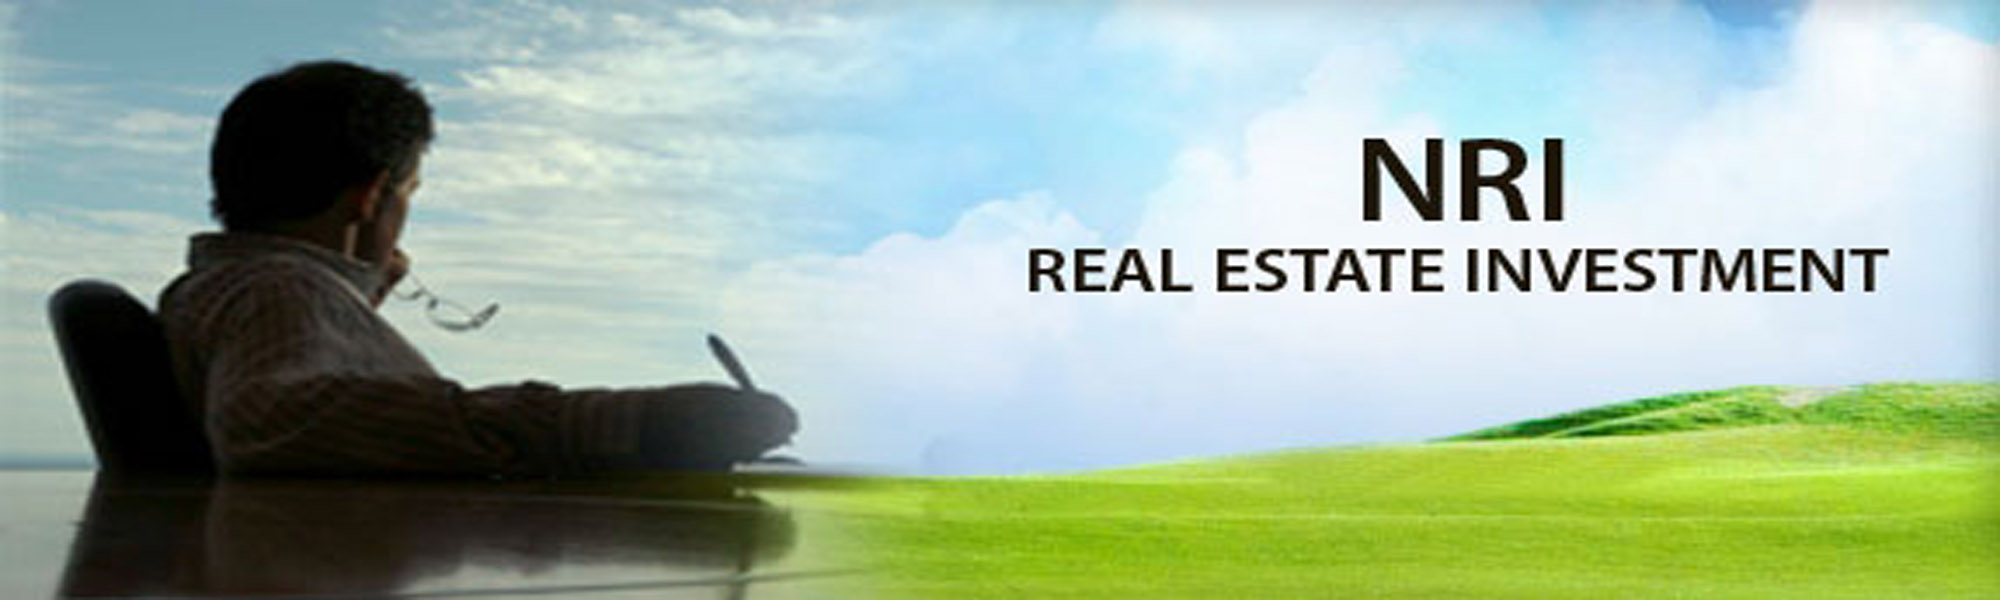 NRI, NRIs, Non Resident Indians, Indian Diaspora, NRIs investment in Indian property, NRIs investment in real estate, NRIs rules for investment, NRIs property search, India real estate news, Indian realty news, Real estate news India, Indian property market news, Realty Plus, Realty Fact, Track2Realty